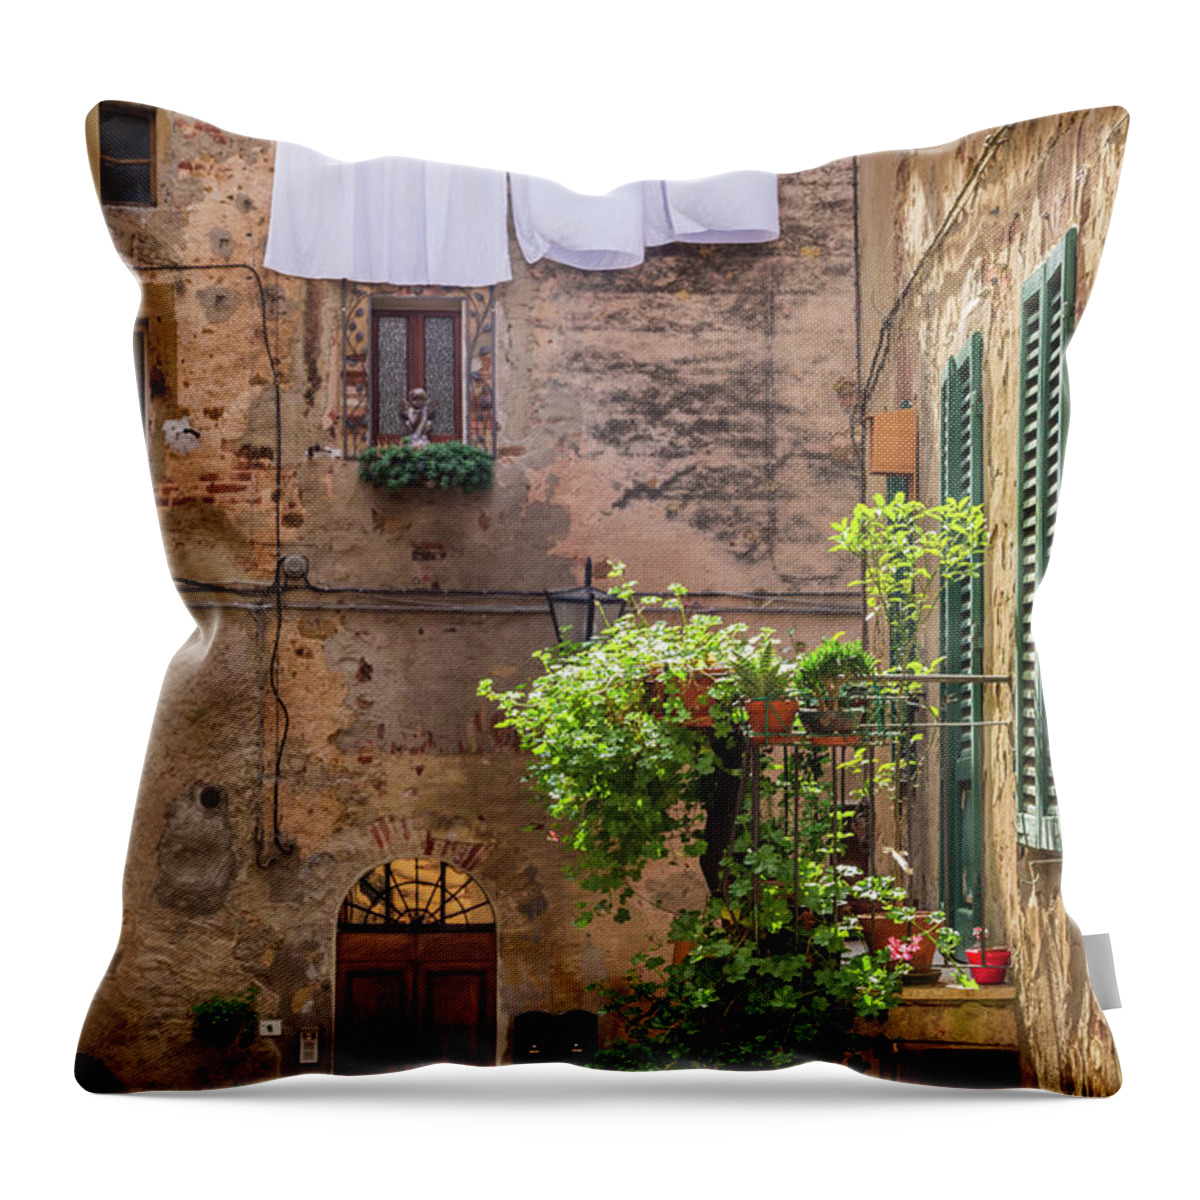 Suburb Throw Pillow featuring the photograph Vintage Balcony On The Street In Italy by Shaiith